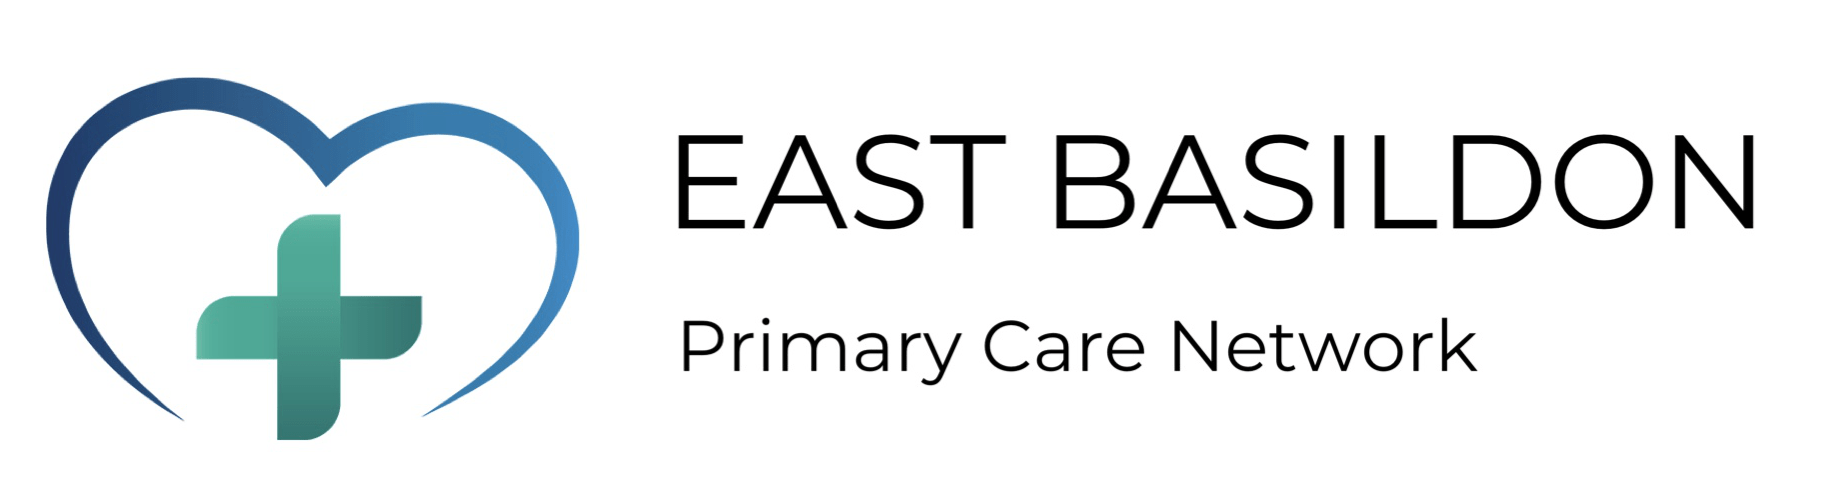 East Basildon Primary Care Network